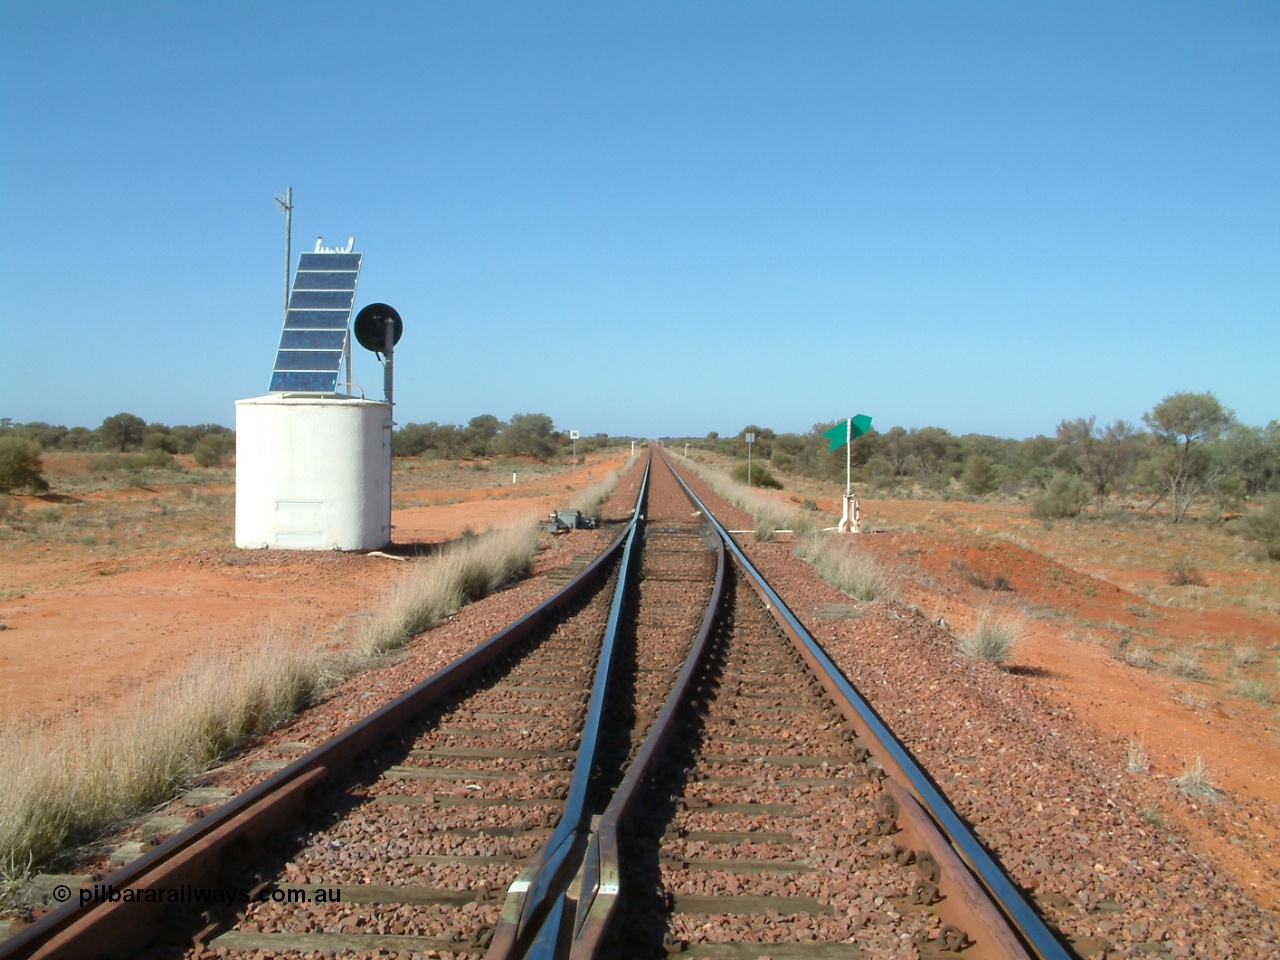 030416 094308
Wirrida Siding, looking south towards Tarcoola from the south end. Located at the 641 km from the 0 datum at Coonamia and 137 km north of Tarcoola between Carnes and Manguri on the Tarcoola - Alice Springs line. [url=https://goo.gl/maps/d8LUkHjjCDworvhE9]GeoData location[/url]. 16th April 2003.
